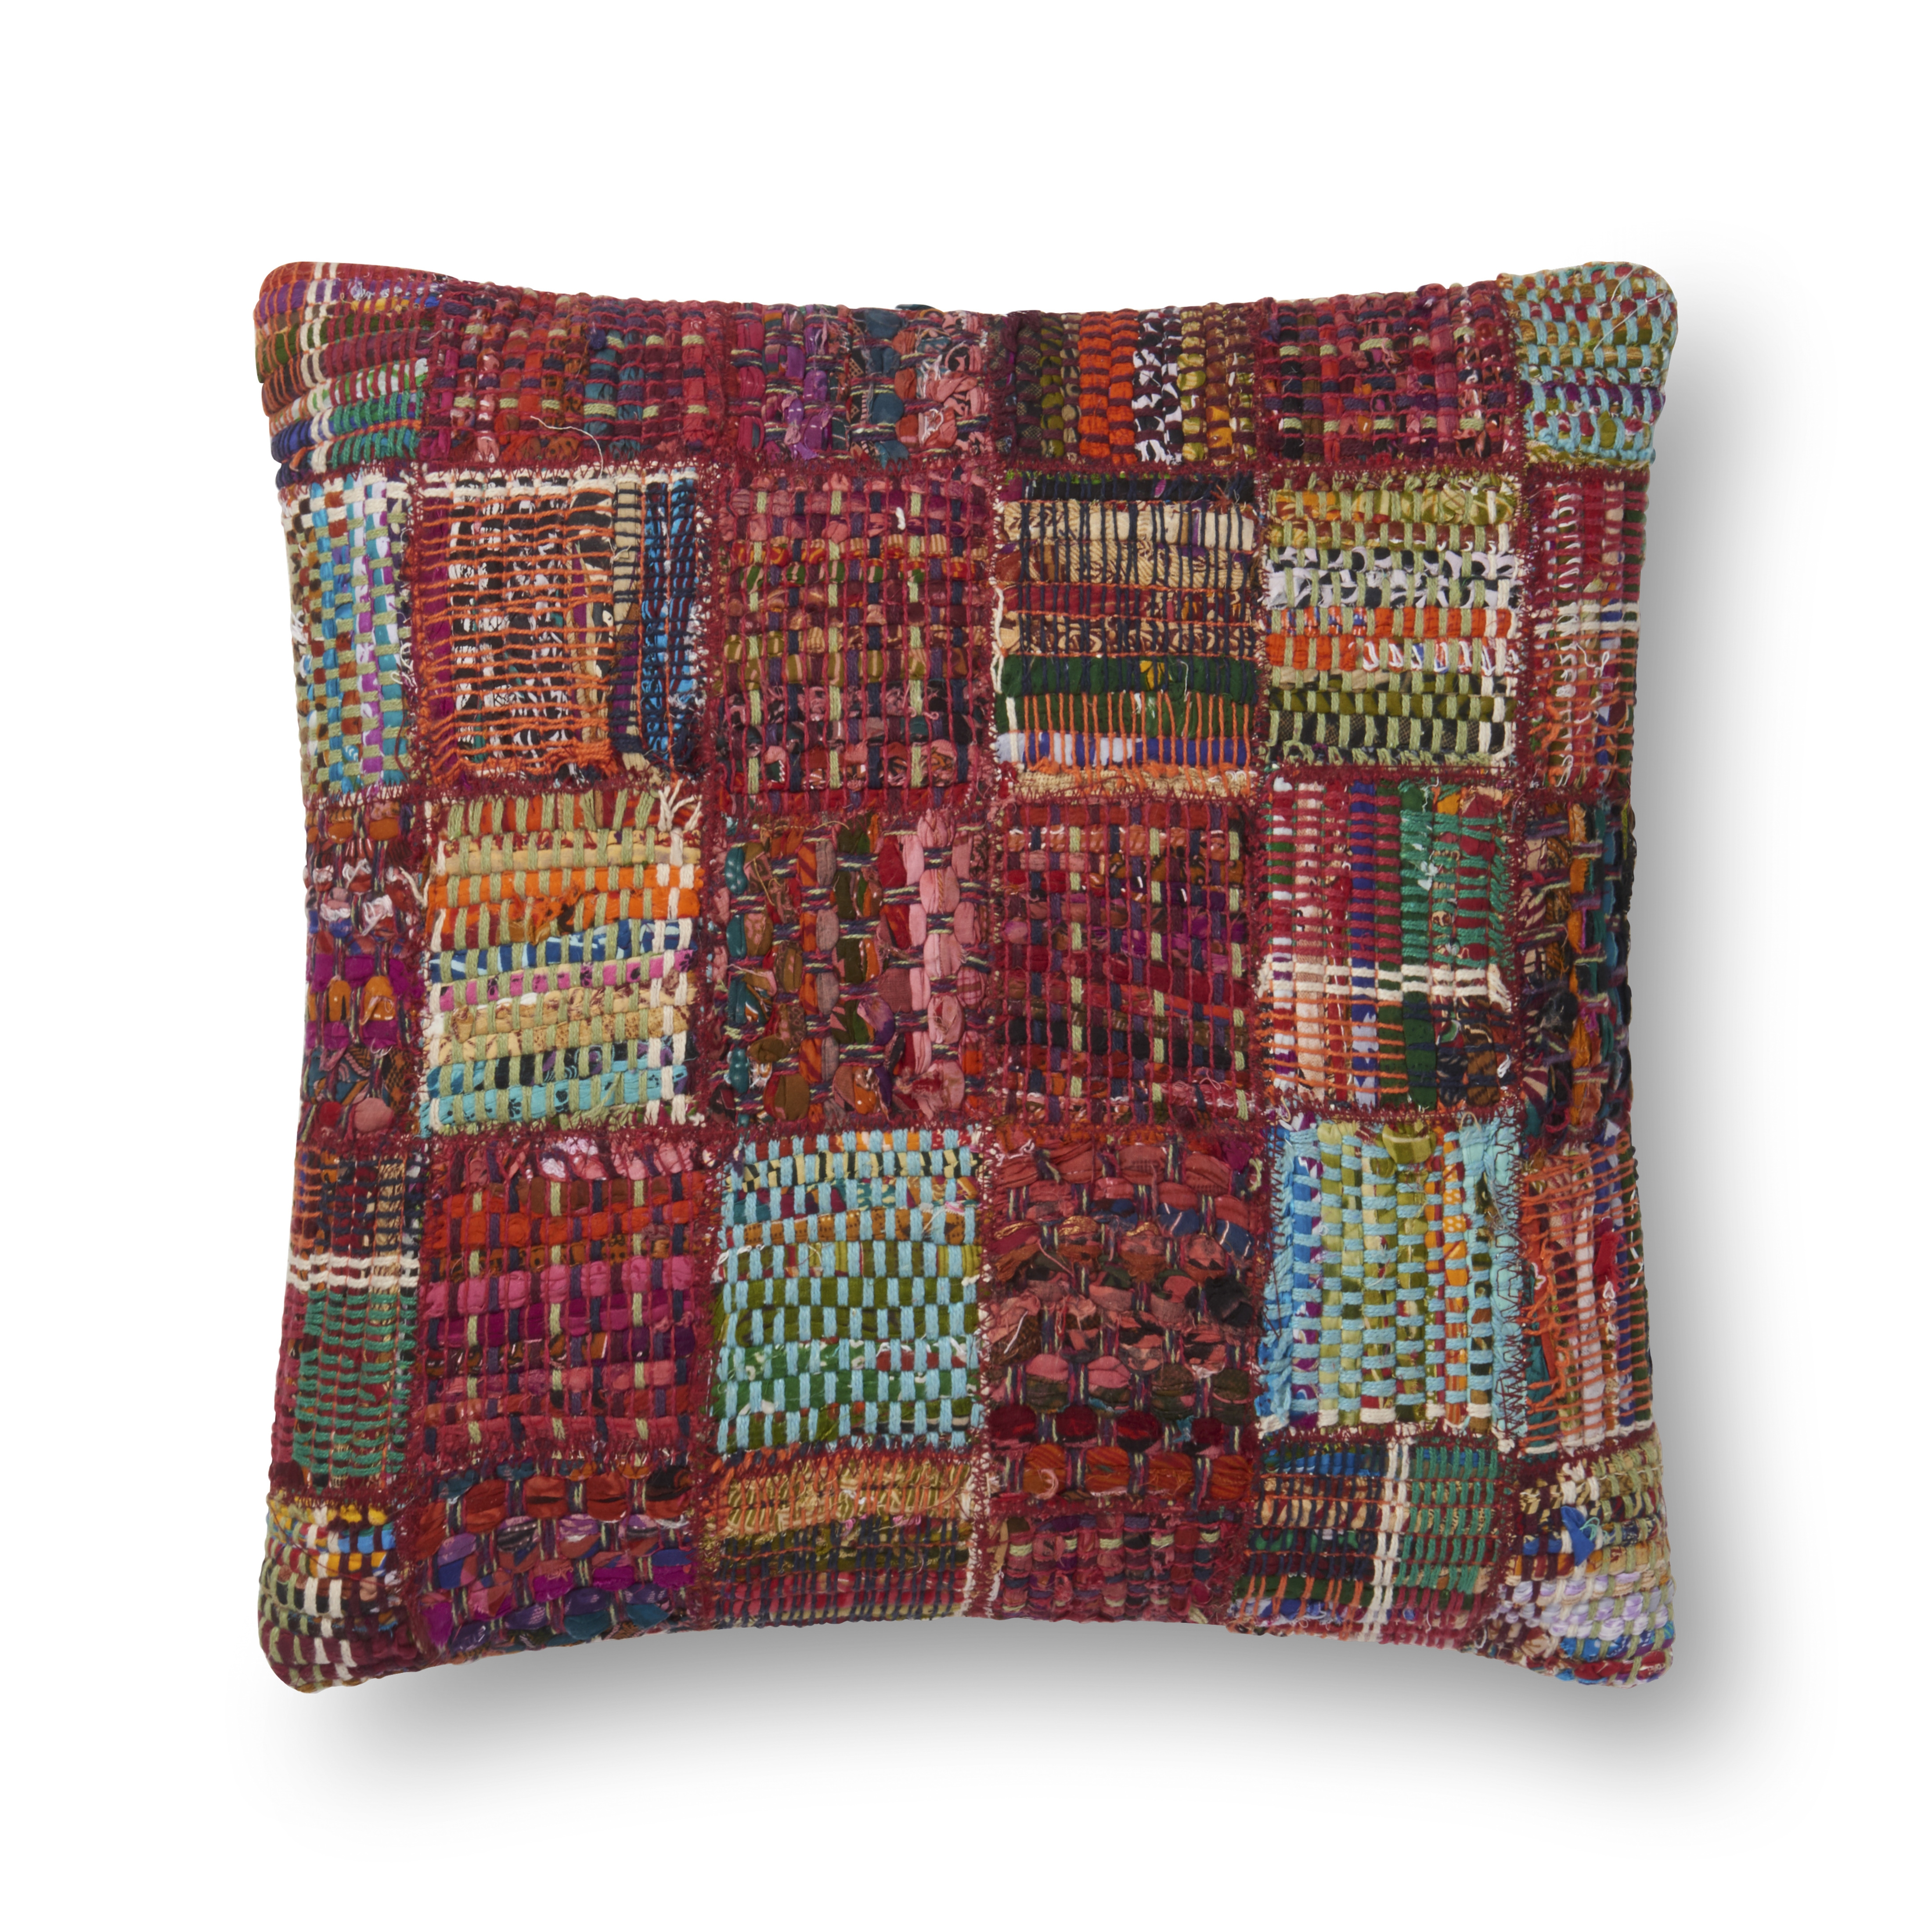 Loloi Pillows P0535 Red / Multi 13" x 21" Cover Only - Image 1